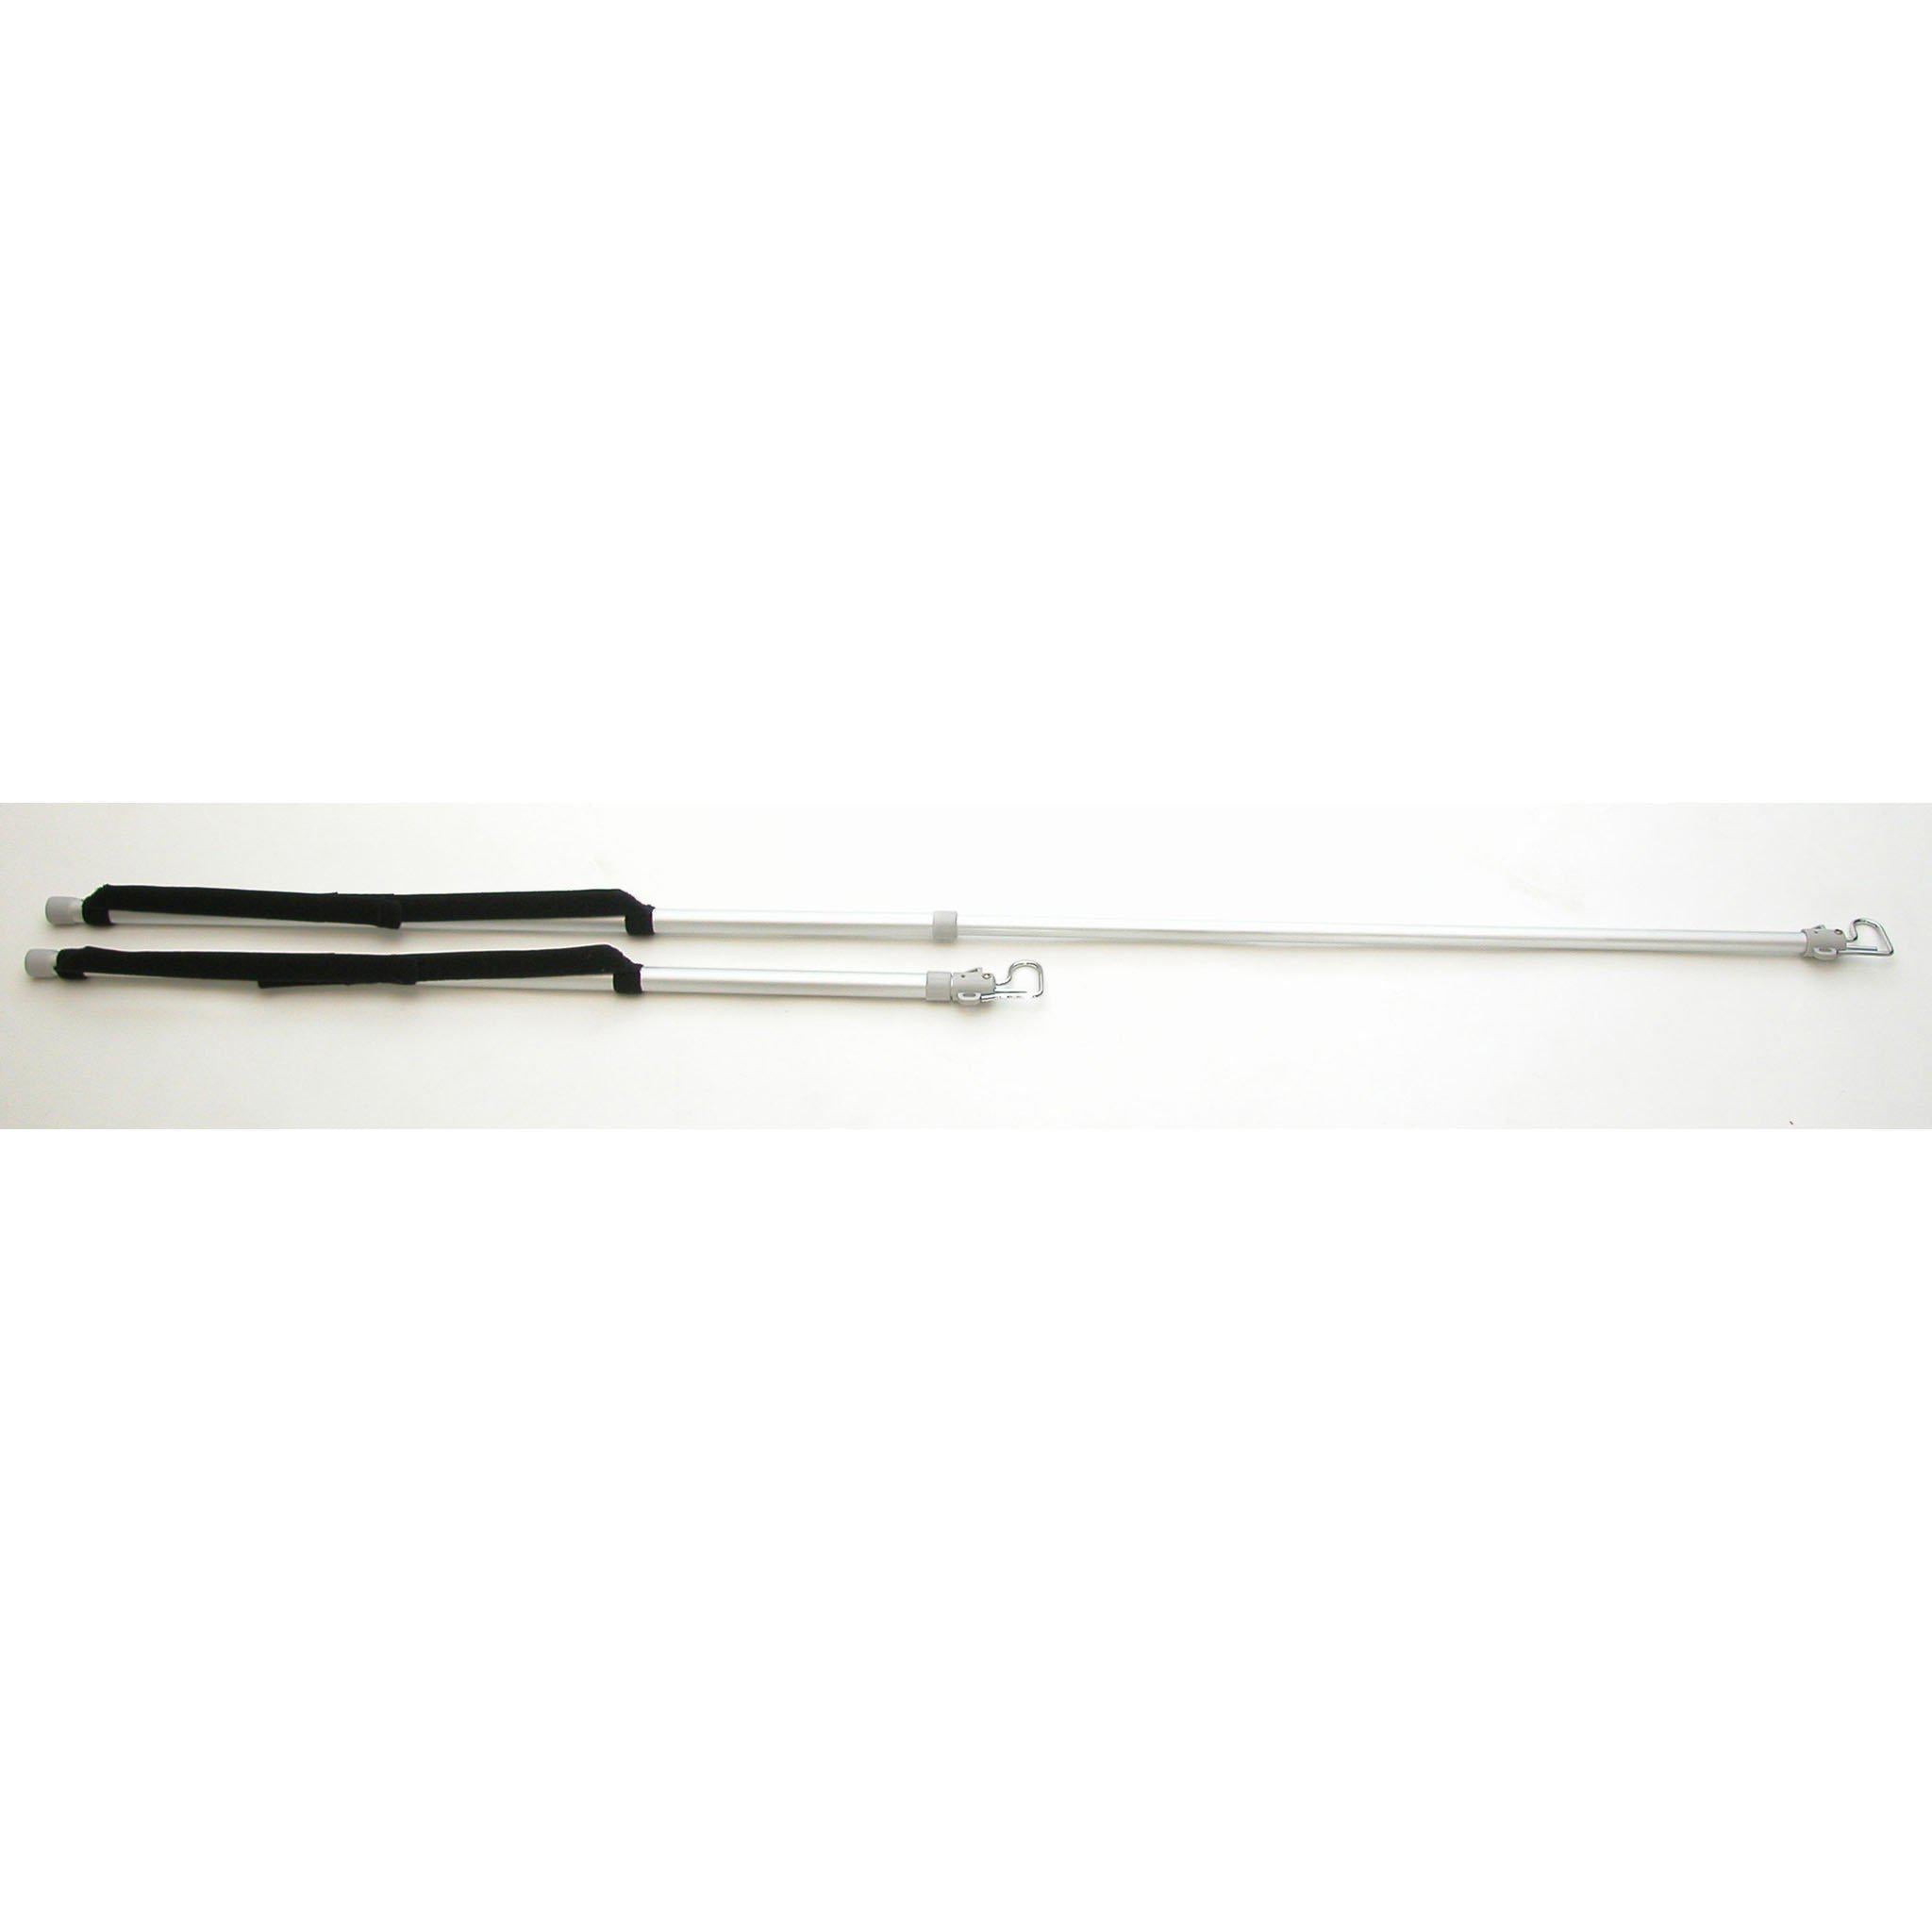 Collapsible IV Pole, Telescoping IV Pole - Byer of Maine